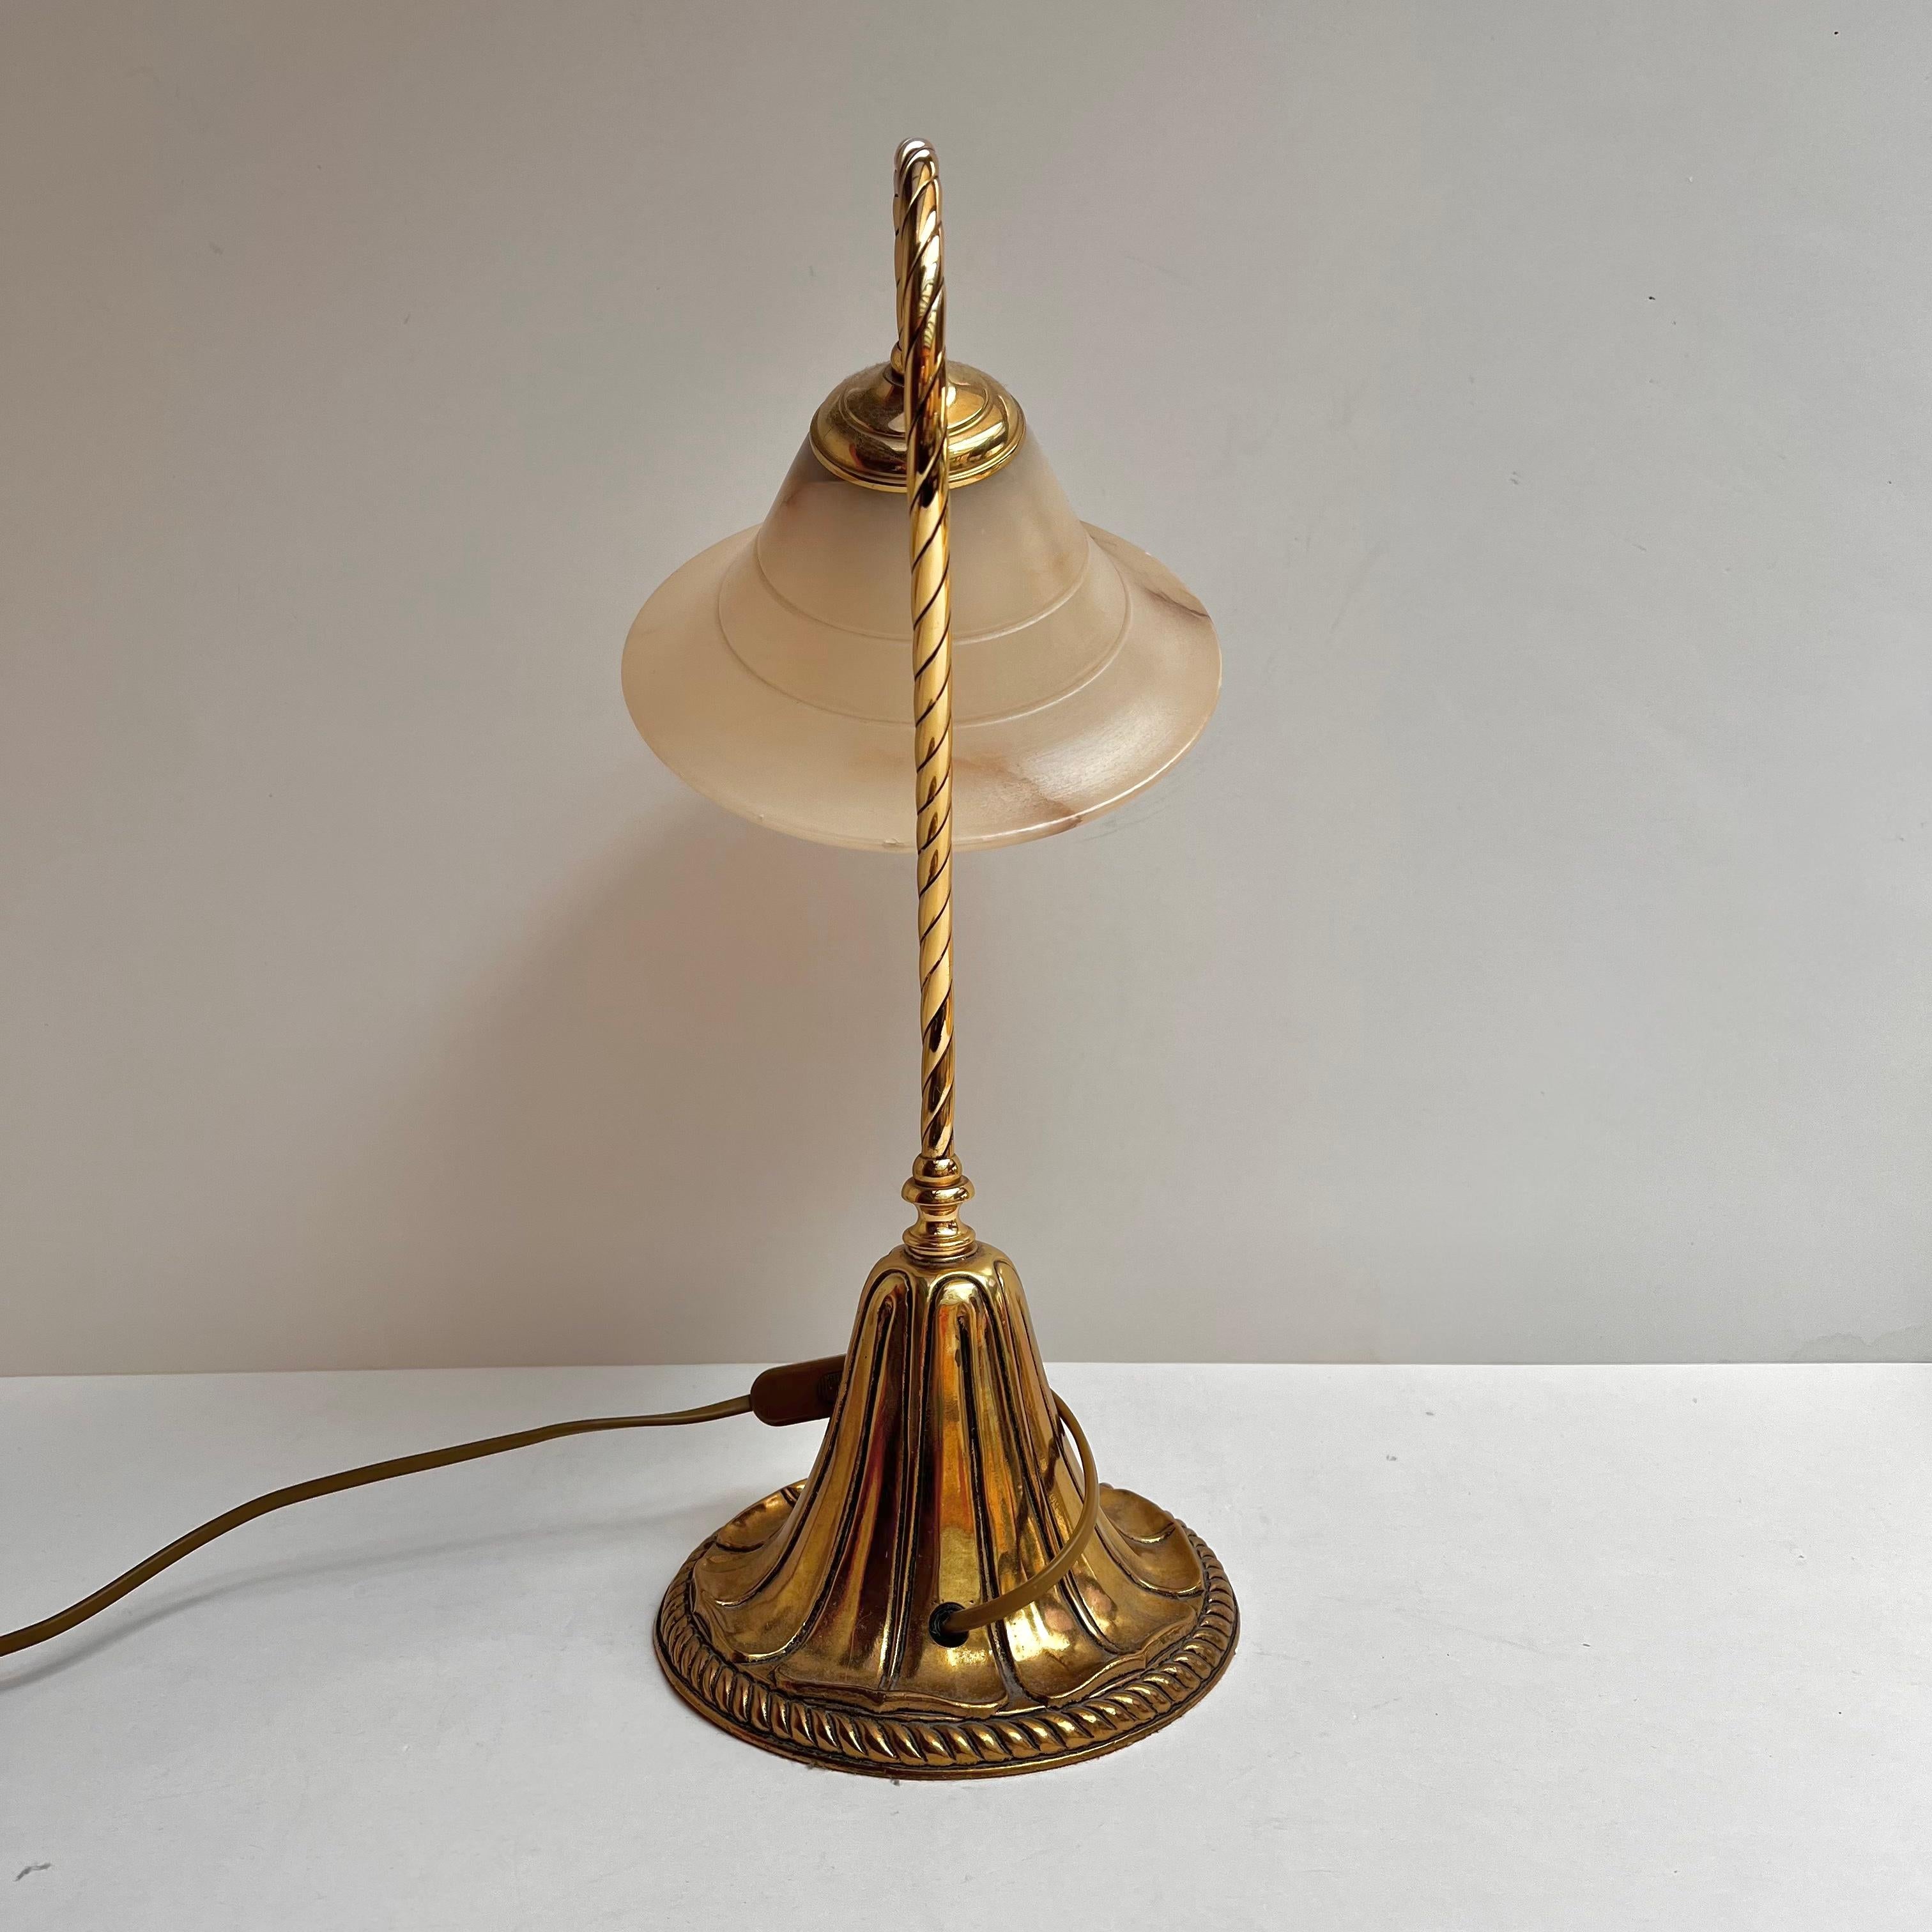 Art Nouveau Style Vintage Table Lamp from Bronceart Torrent, Spain, 1980 In Excellent Condition For Sale In Bastogne, BE